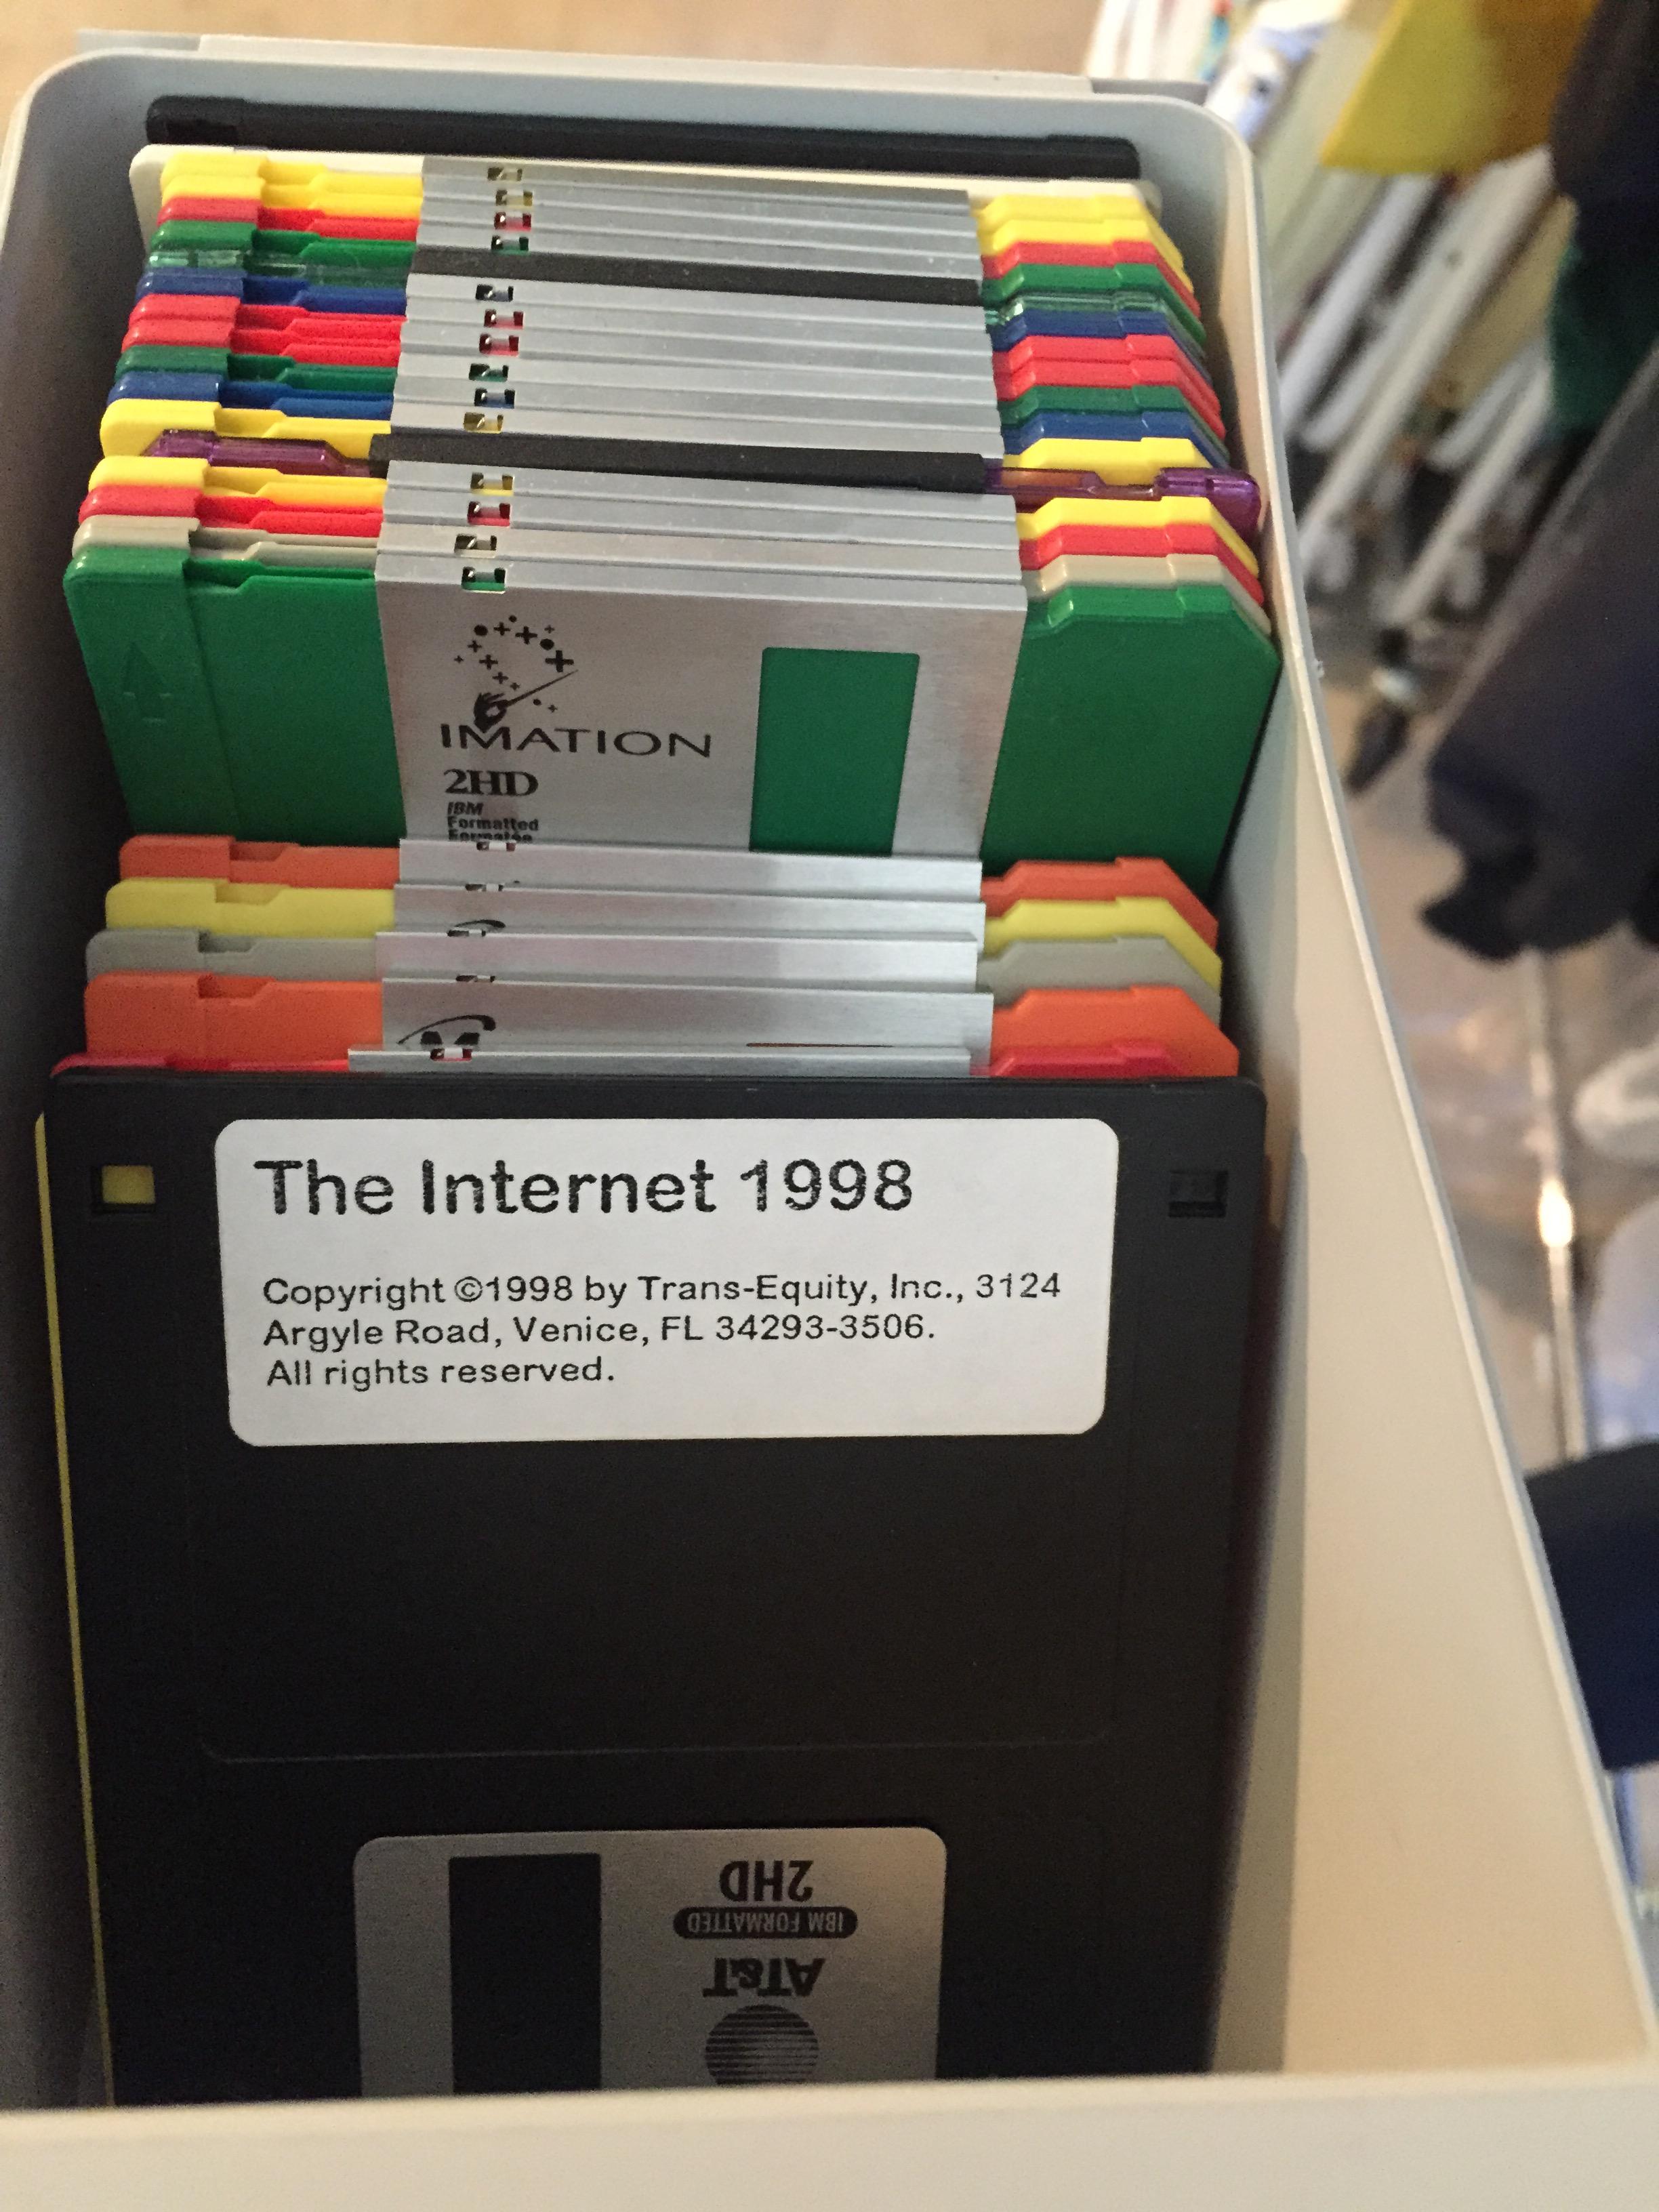 floppy disk meme - Free 3o The Internet 1998 Copyright 1998 by TransEquity, Inc., 3124 Argyle Road, Venice, Fl 342933506 All rights reserved. Ghz